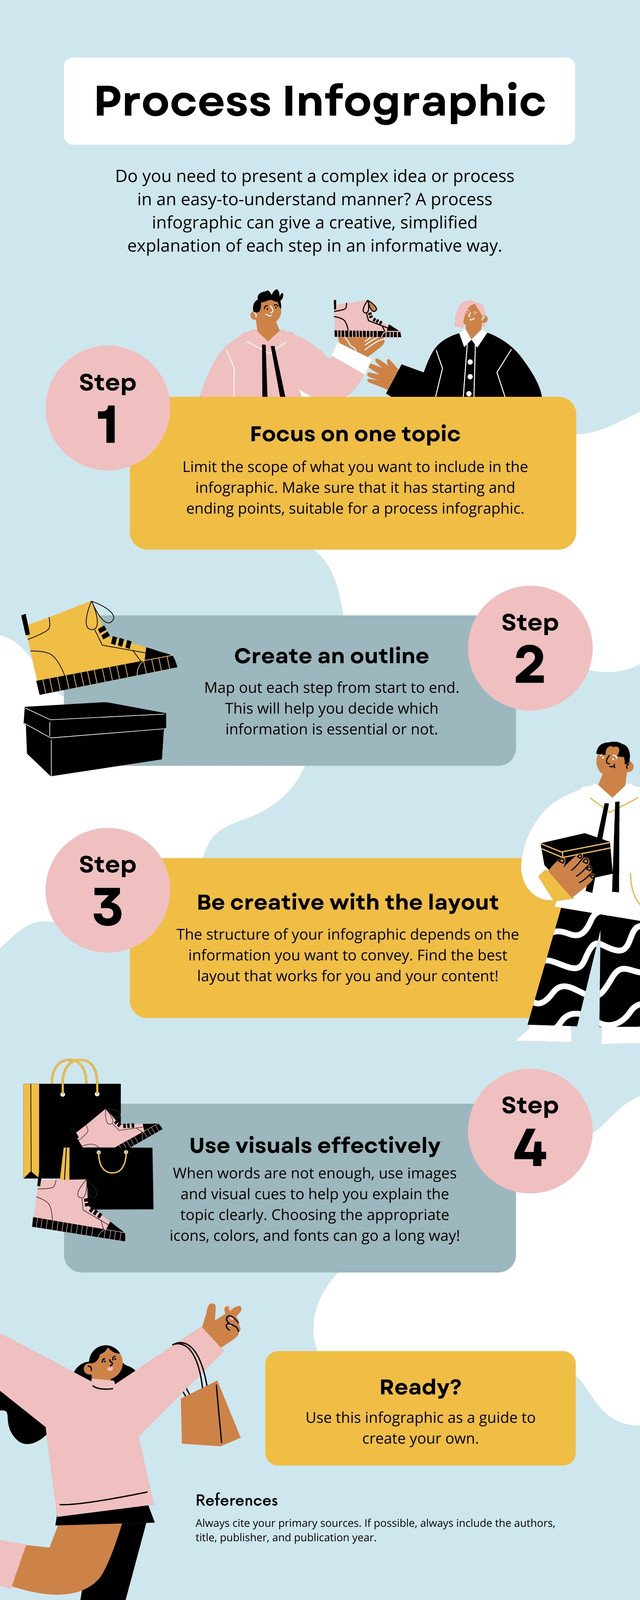 Donation Charity Infographic - Templates by Canva